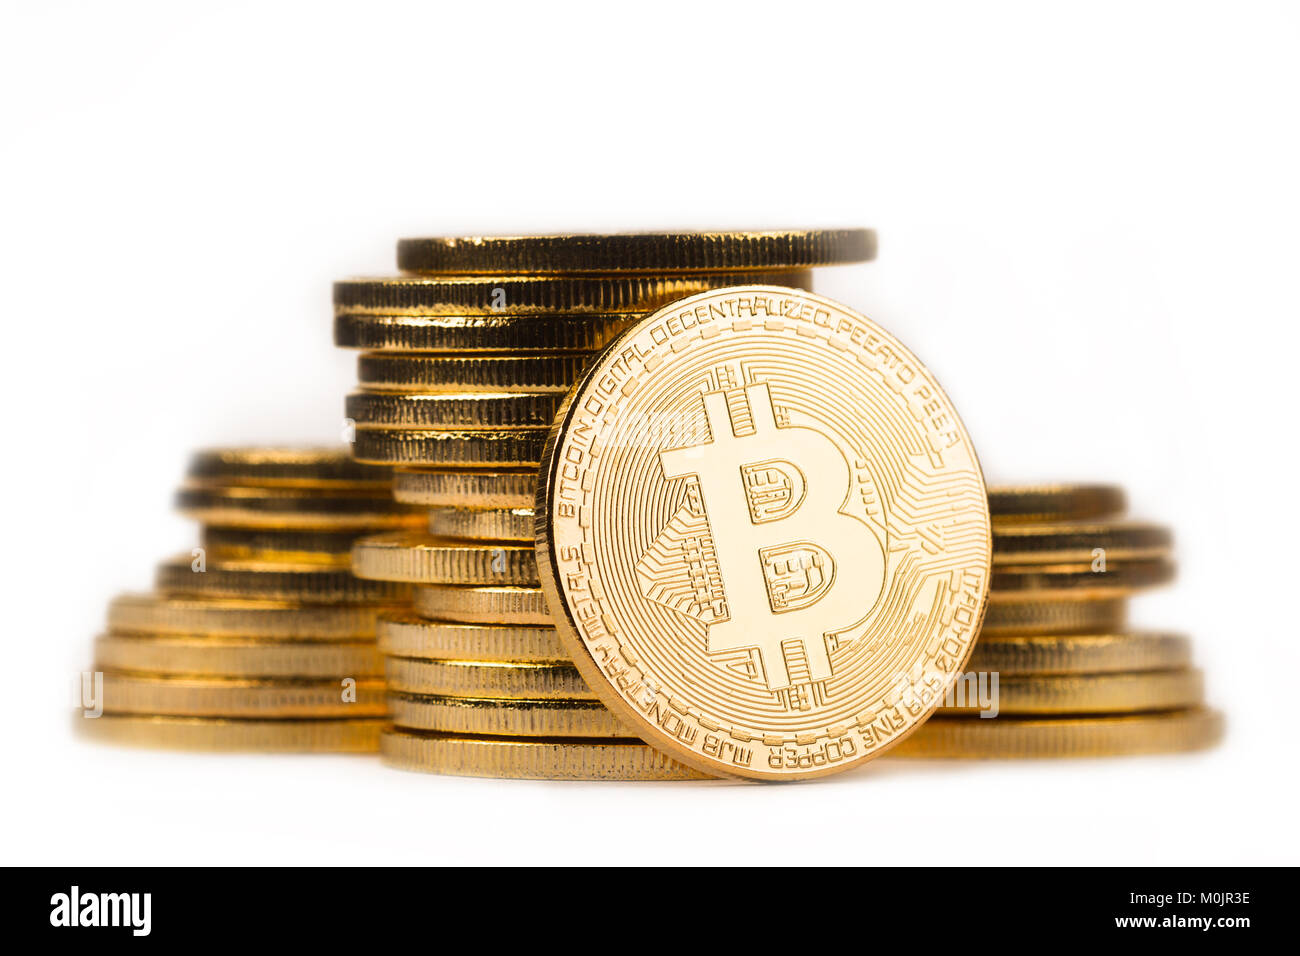 close up golden bitcoin in front of a pile of golden metallic coins isolated on white background Stock Photo